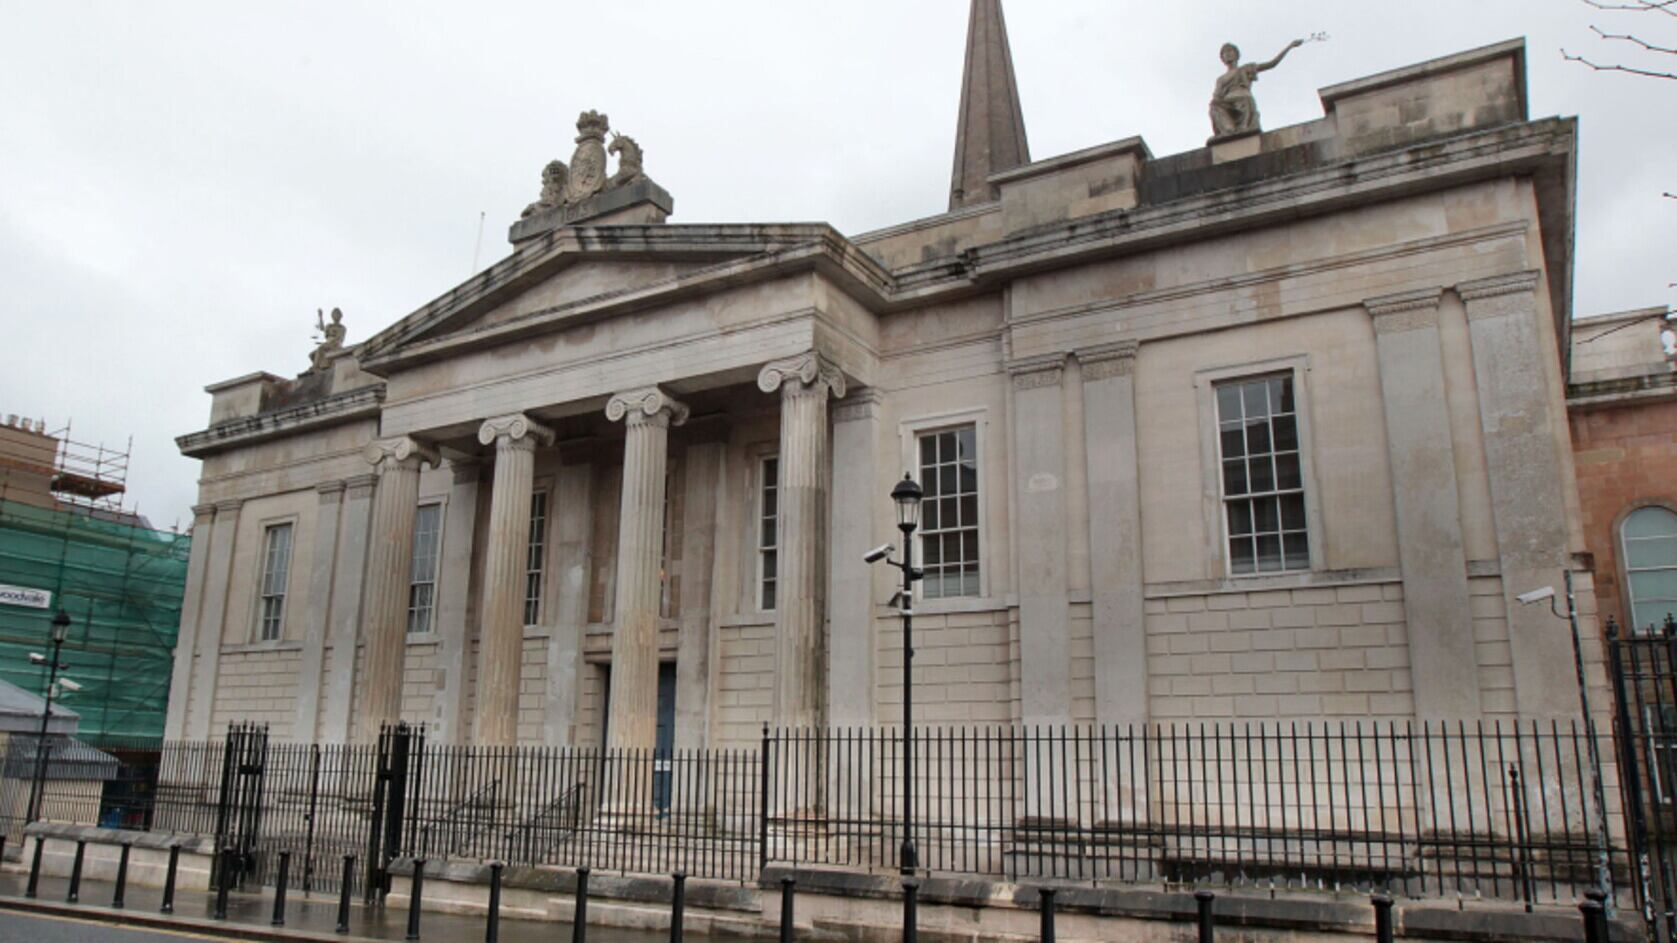 A brief hearing took place at Derry's Bishop Street courthouse